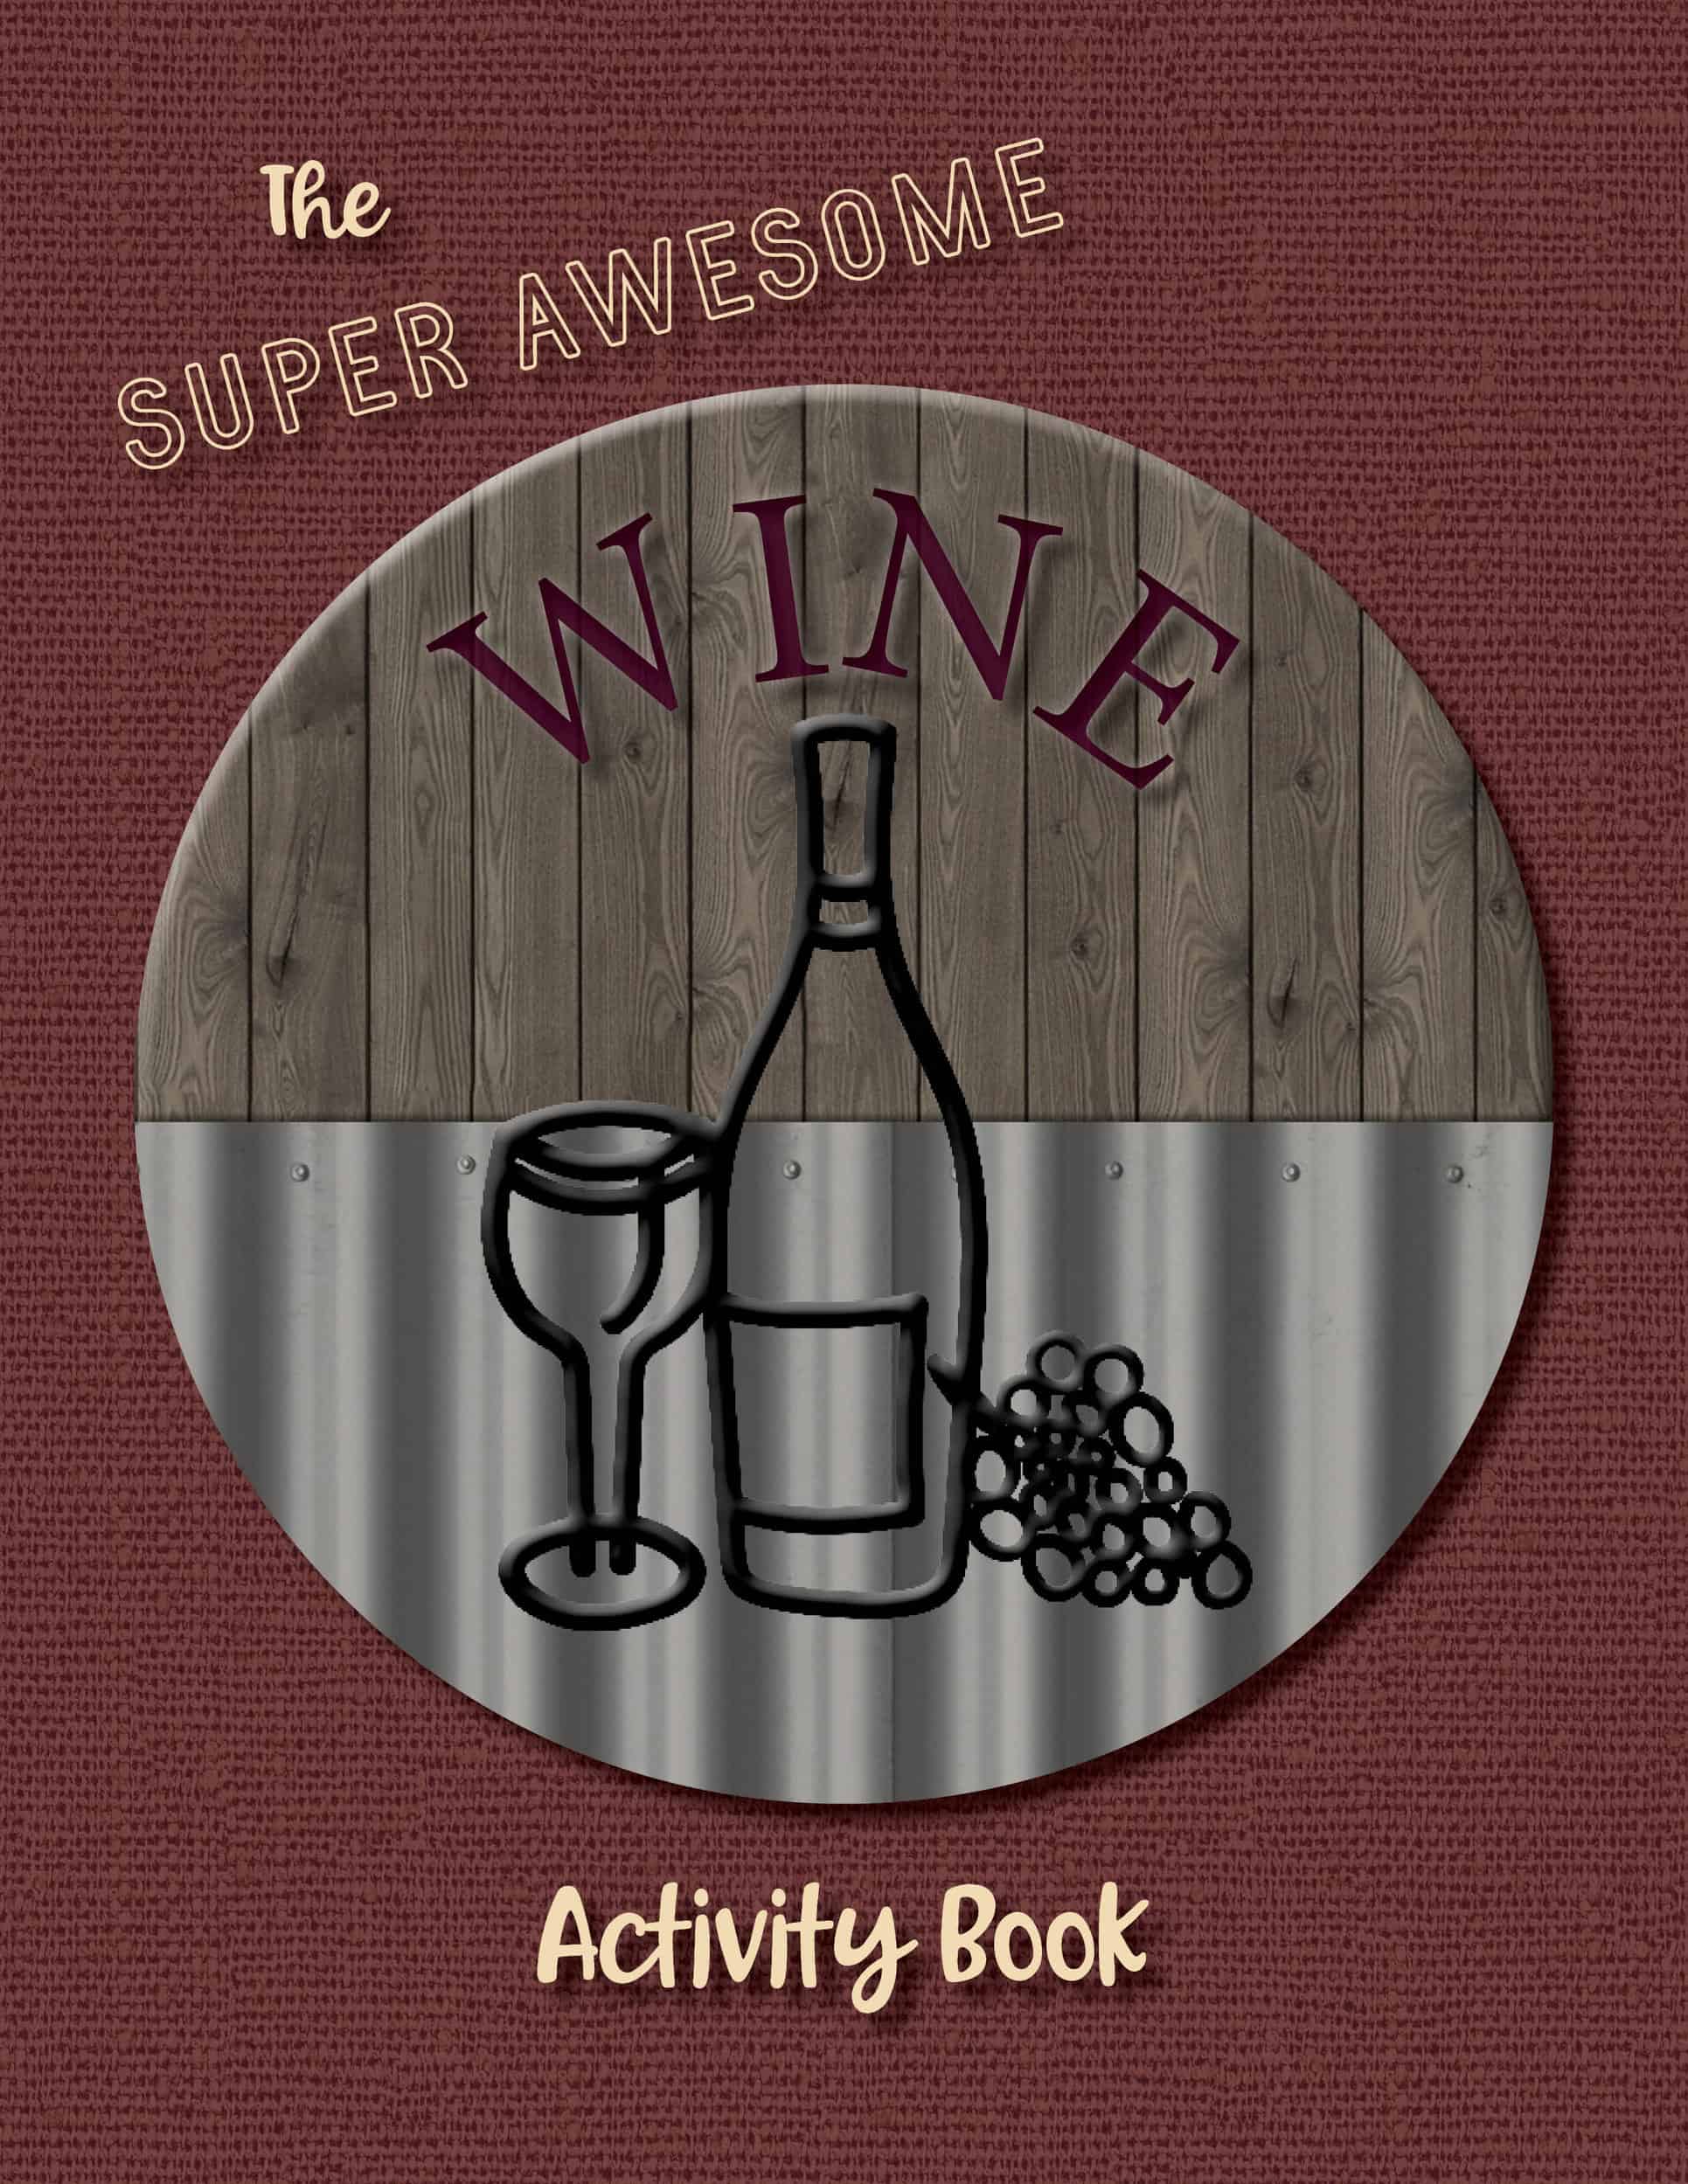 This The Super Awesome Wine Activity Book is made with love by Super Awesome Puzzles! Shop more unique gift ideas today with Spots Initiatives, the best way to support creators.